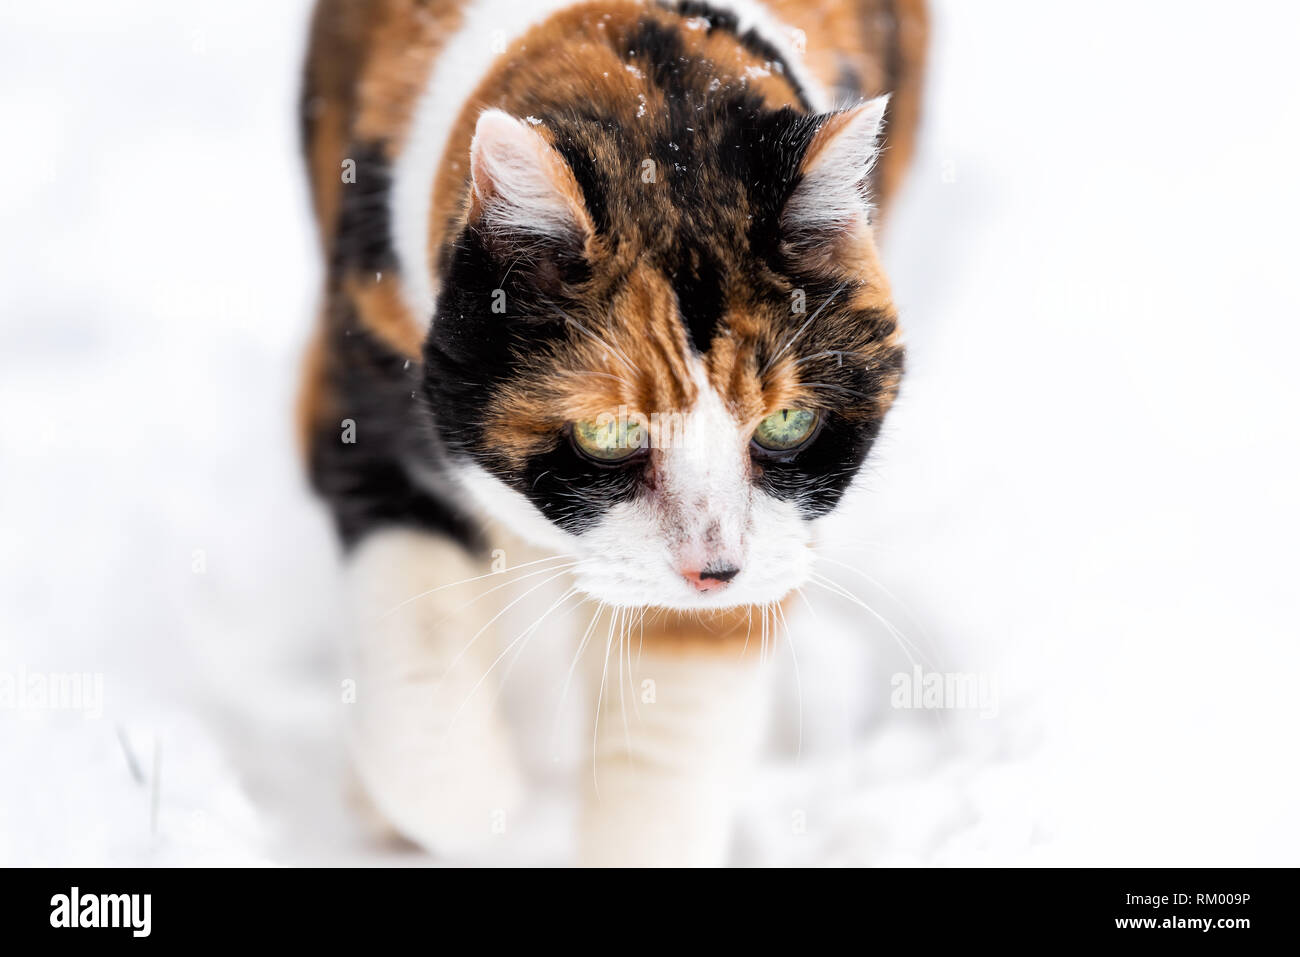 Calico cat face closeup outside outdoors in backyard during snow snowing snowstorm by wooden fence in garden on lawn walking curious exploring Stock Photo